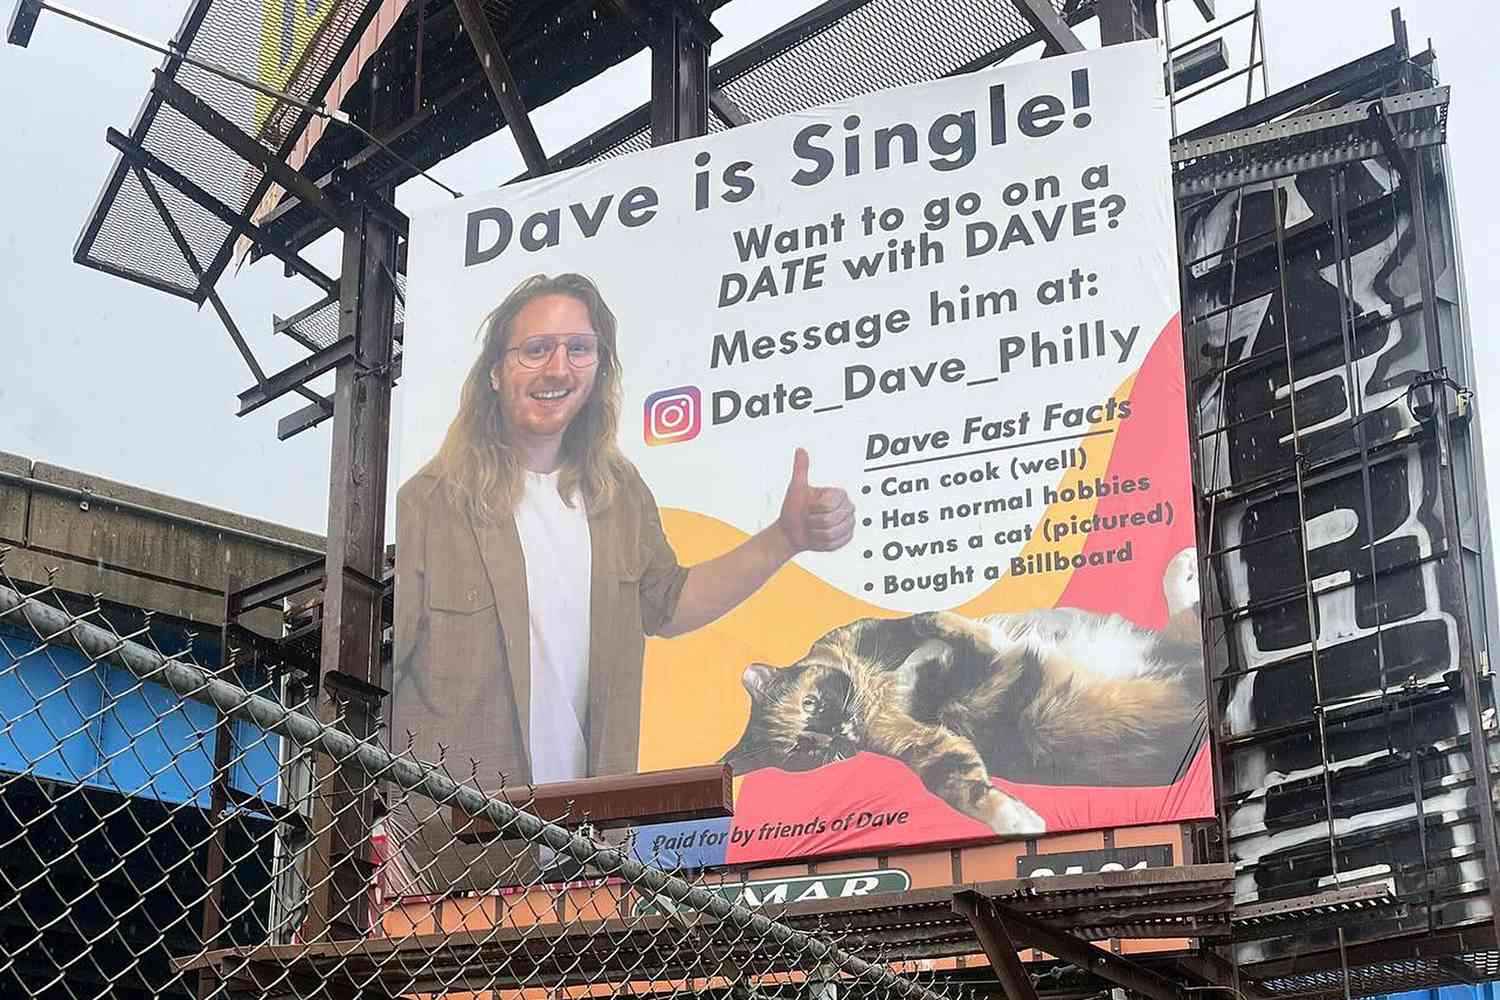 Single Man Rents Billboard to Find a Date, Promises He 'Has Normal Hobbies' and 'Can Cook (Well)’